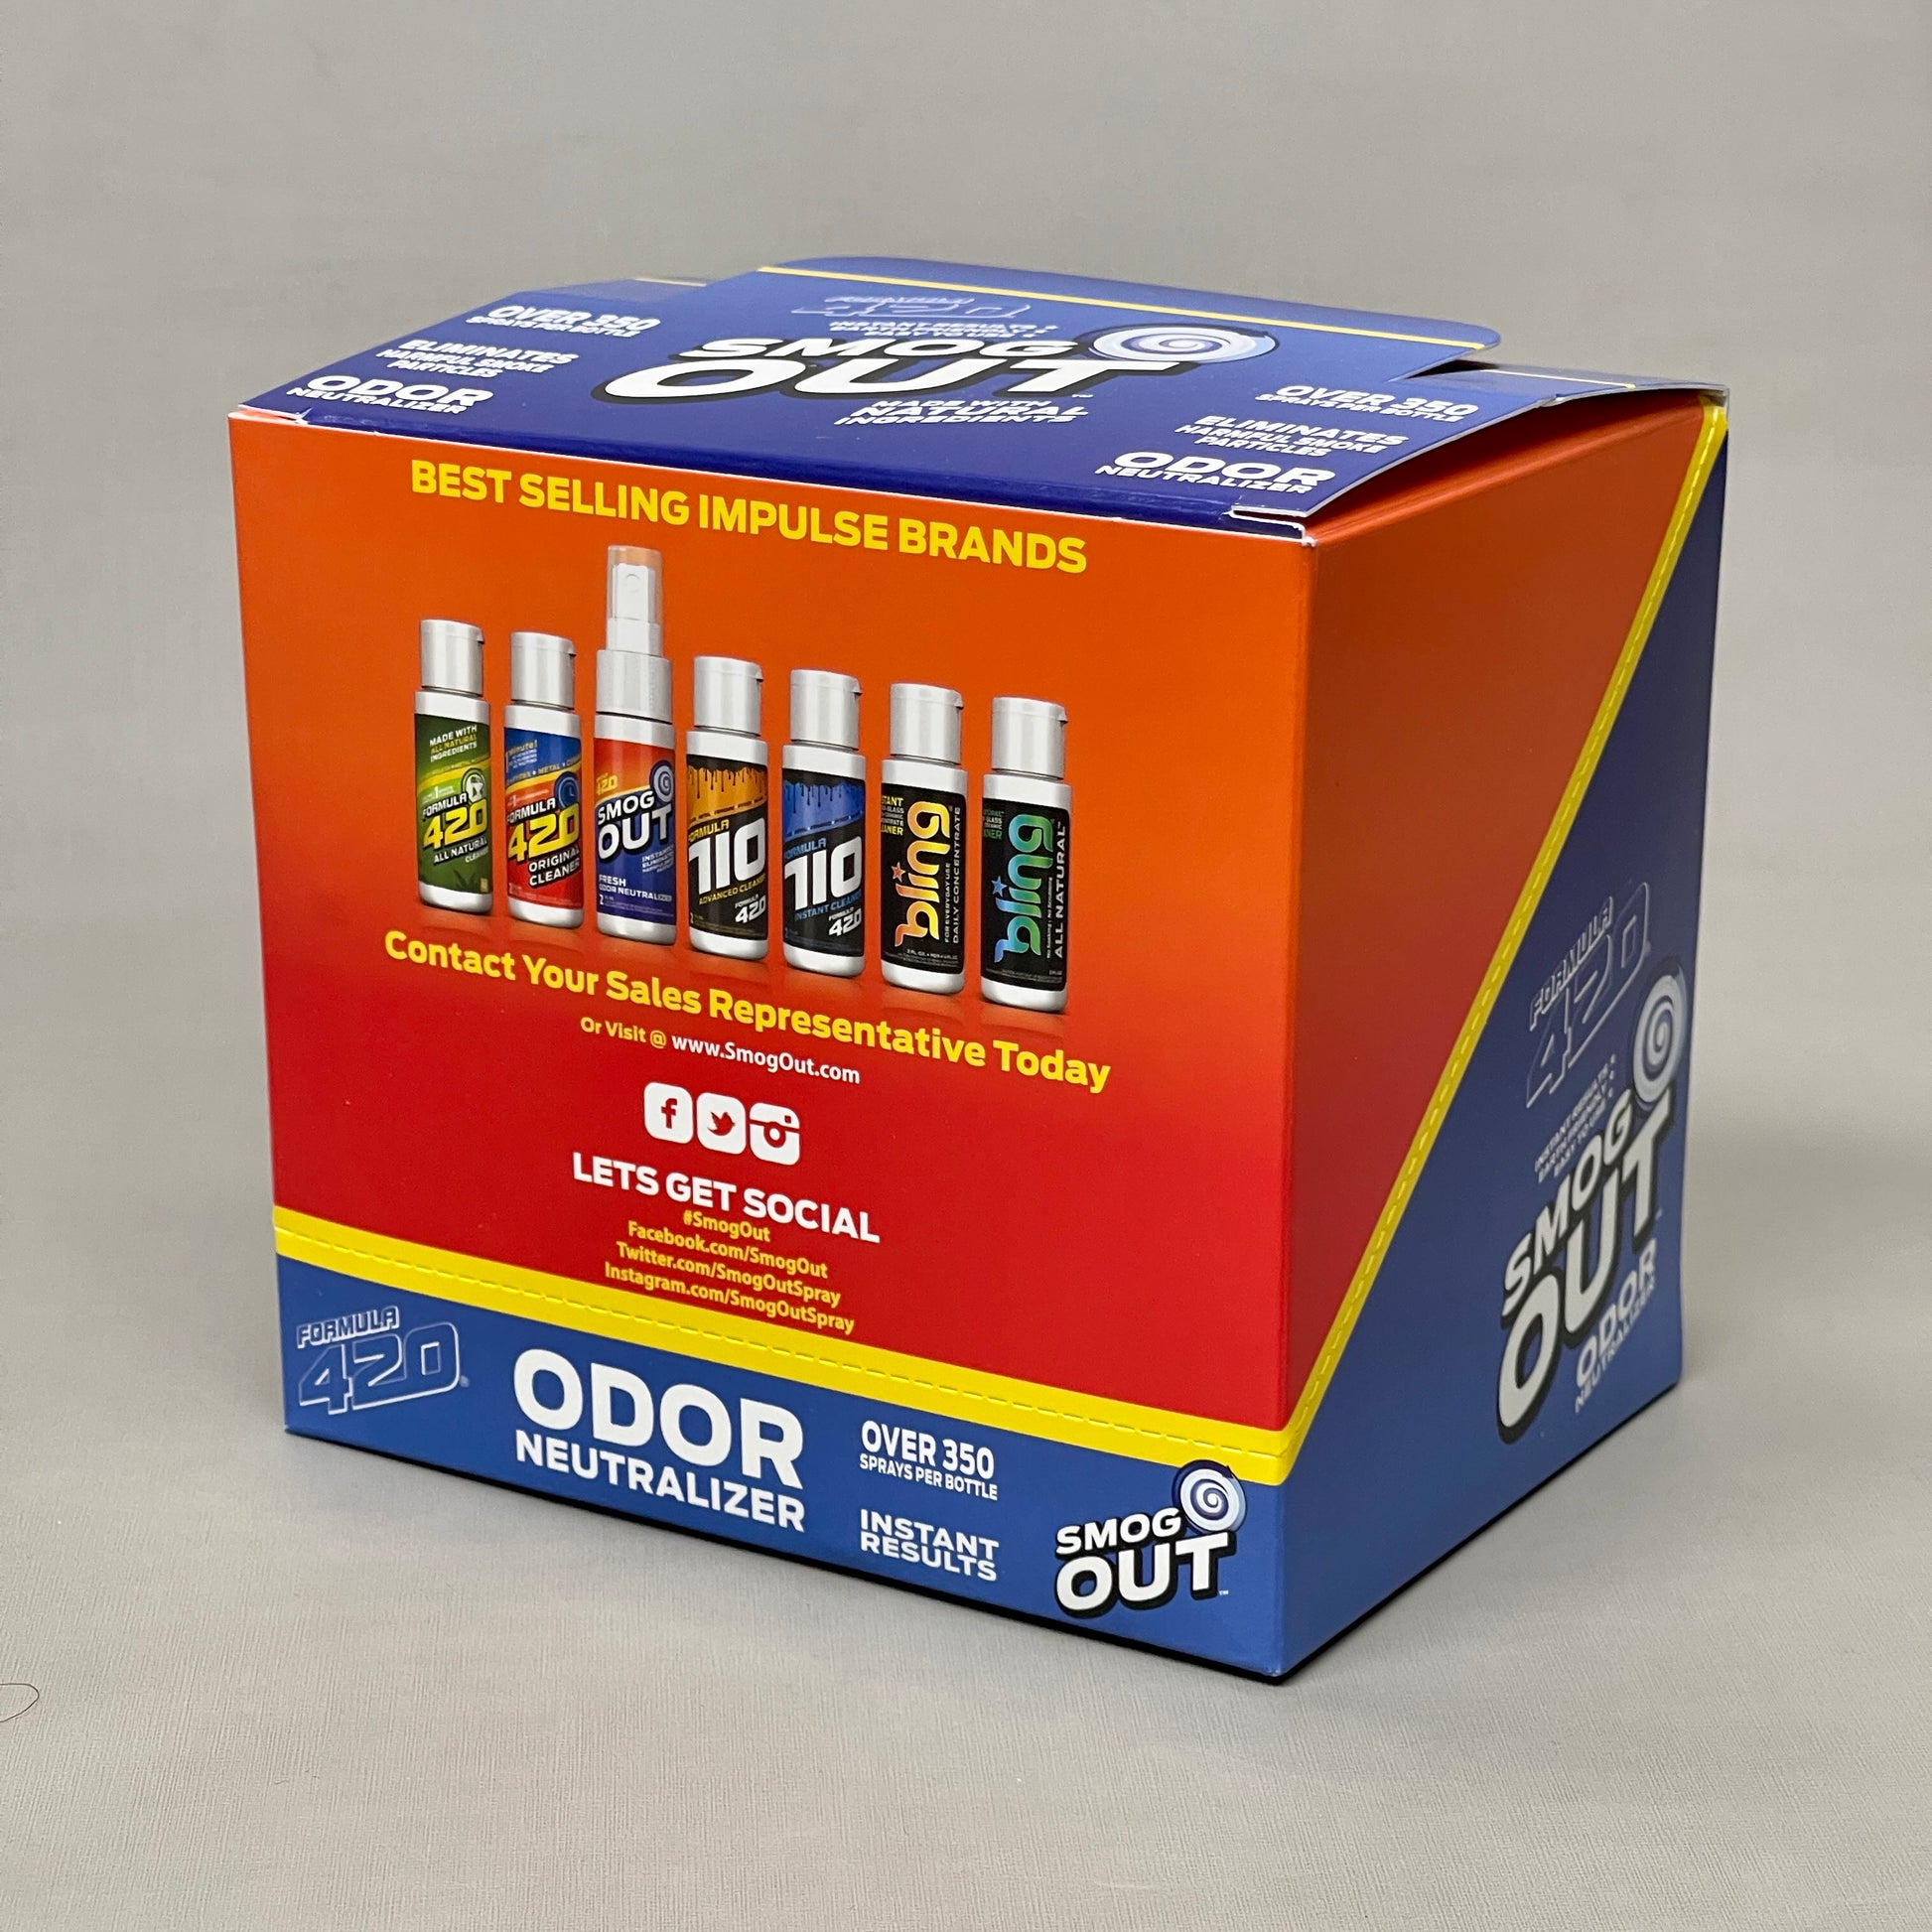 FORMULA 420 Smog-Out 12-Pack! Odor Neutralizer 2 oz (New) – PayWut